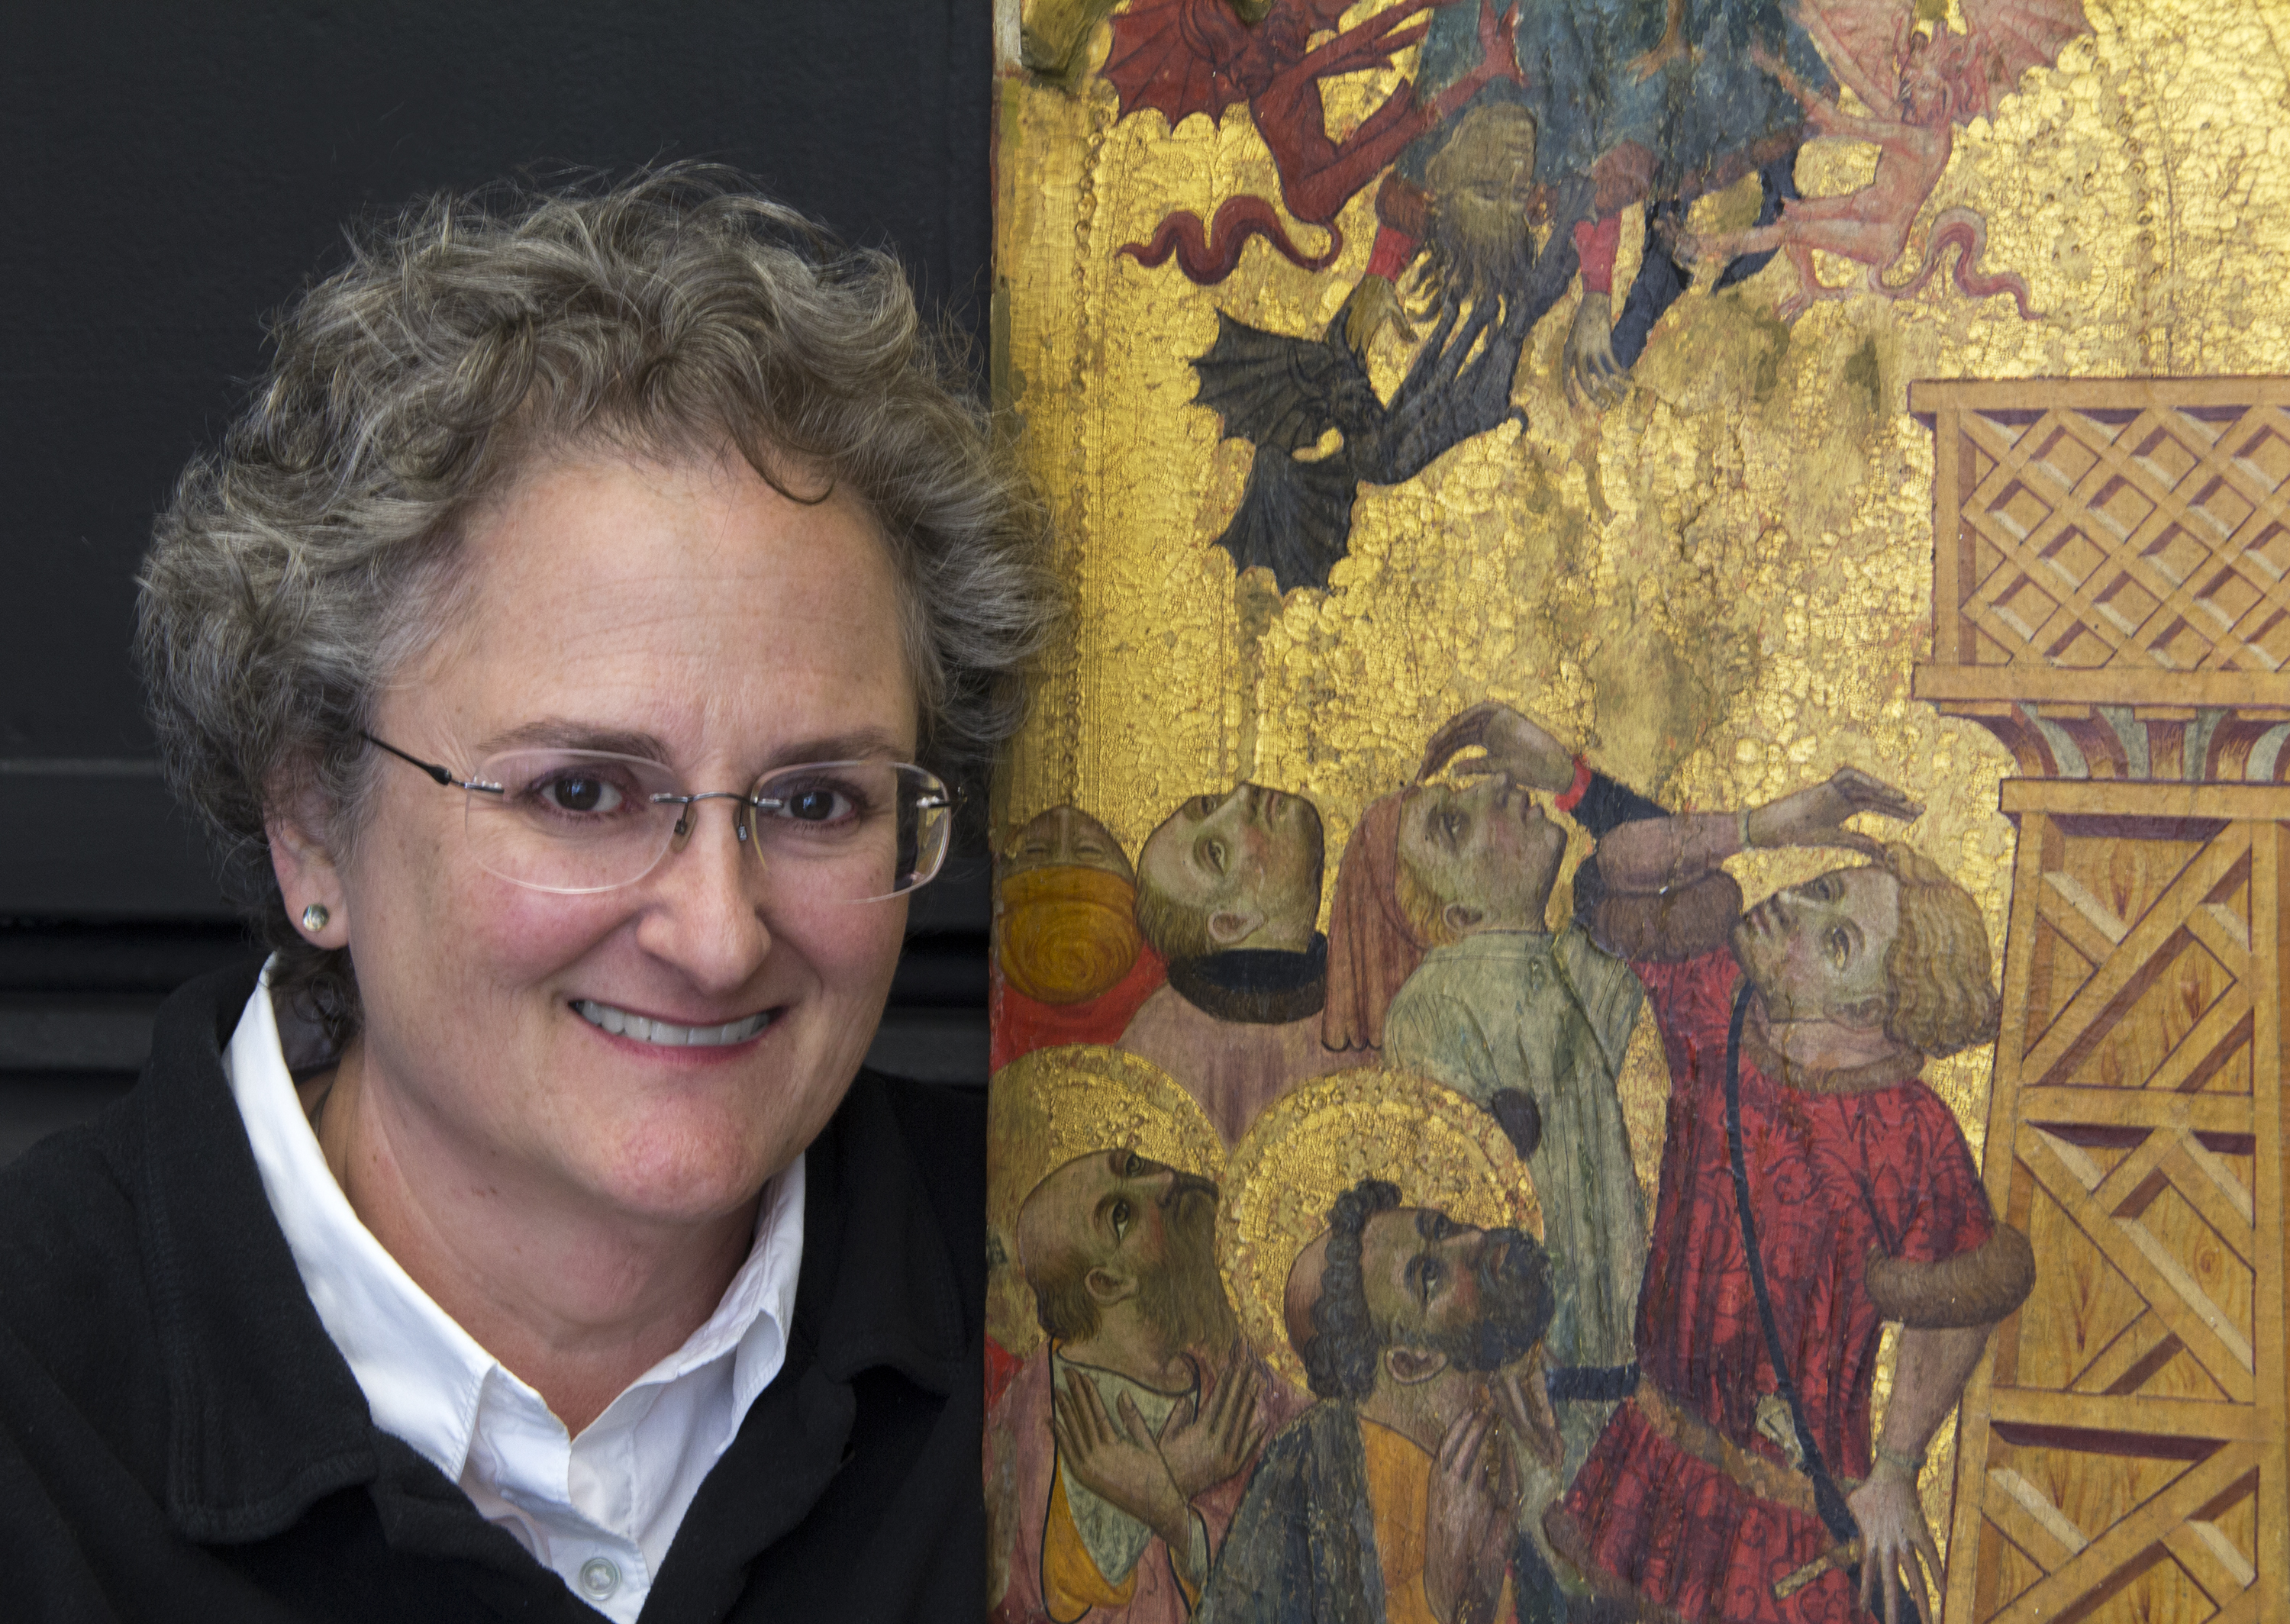 Serena Urry, Chief Conservator of the Cincinnati Art Museum, has worked on a number of paintings for the Dayton Art Institute.  She will speak at the DAI on July 24th.  CONTRIBUTION